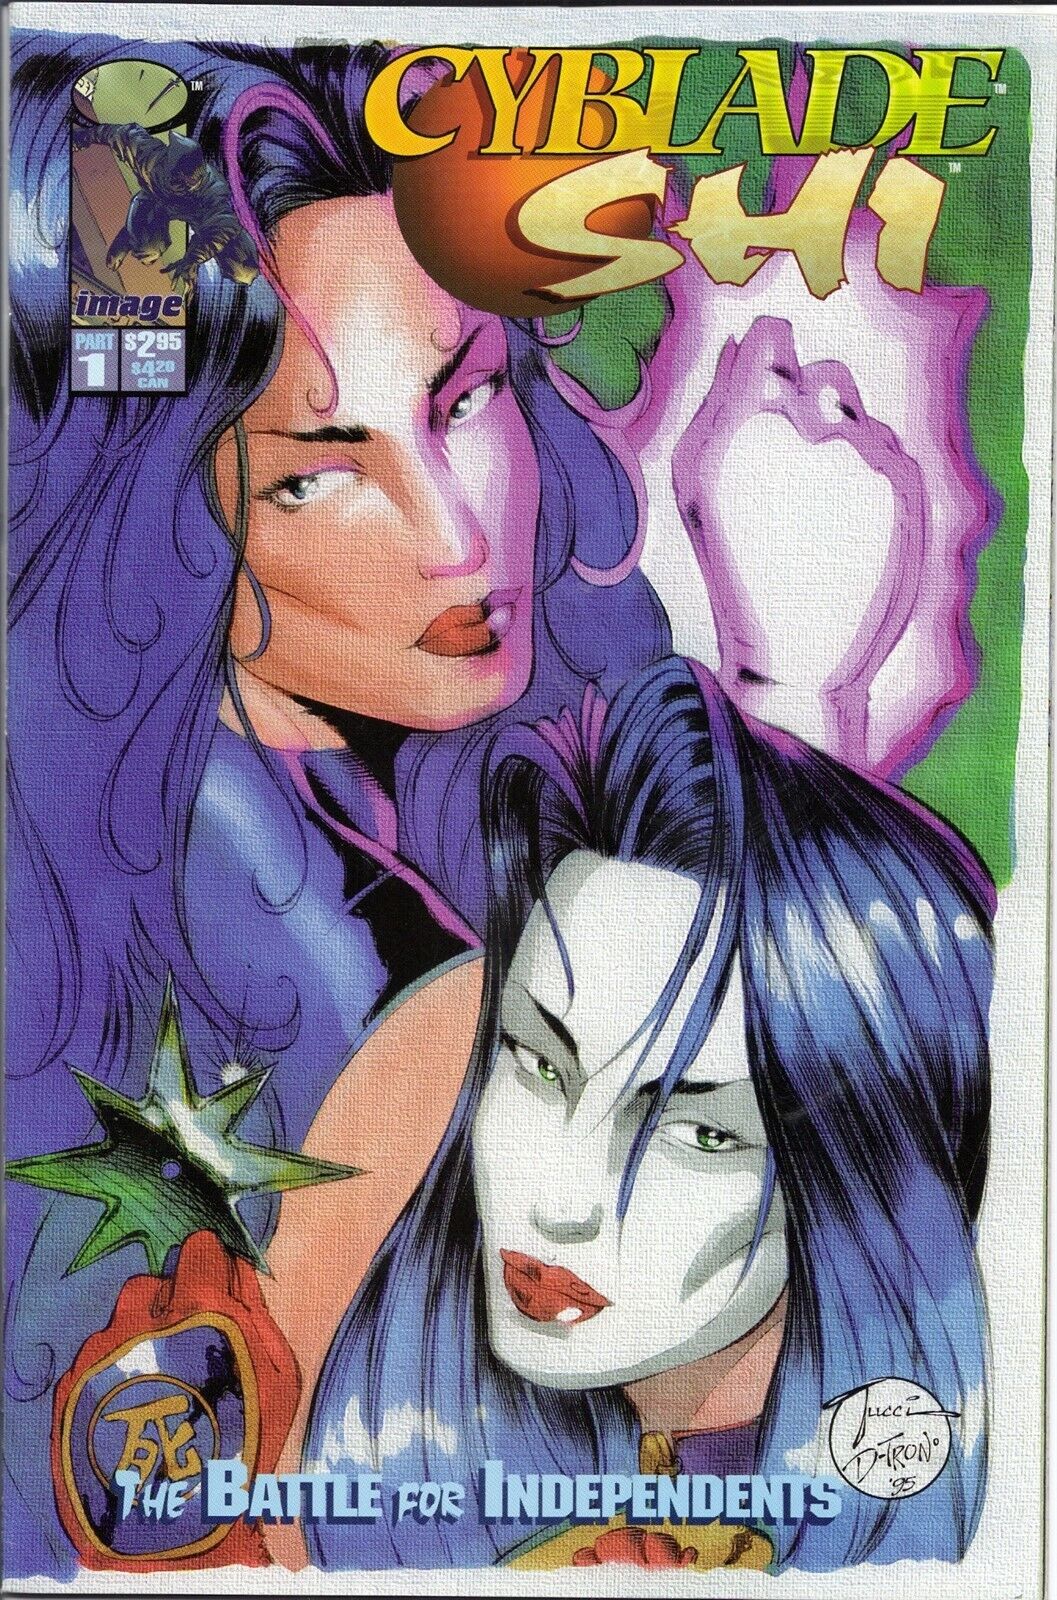 CYBLADE SHI # 1 THE BATTLE FOR INDEPENDENTS FIRST APPEARANCE Tucci Variant WITCHBLADE  IMAGE  COMIC BOOK 1995